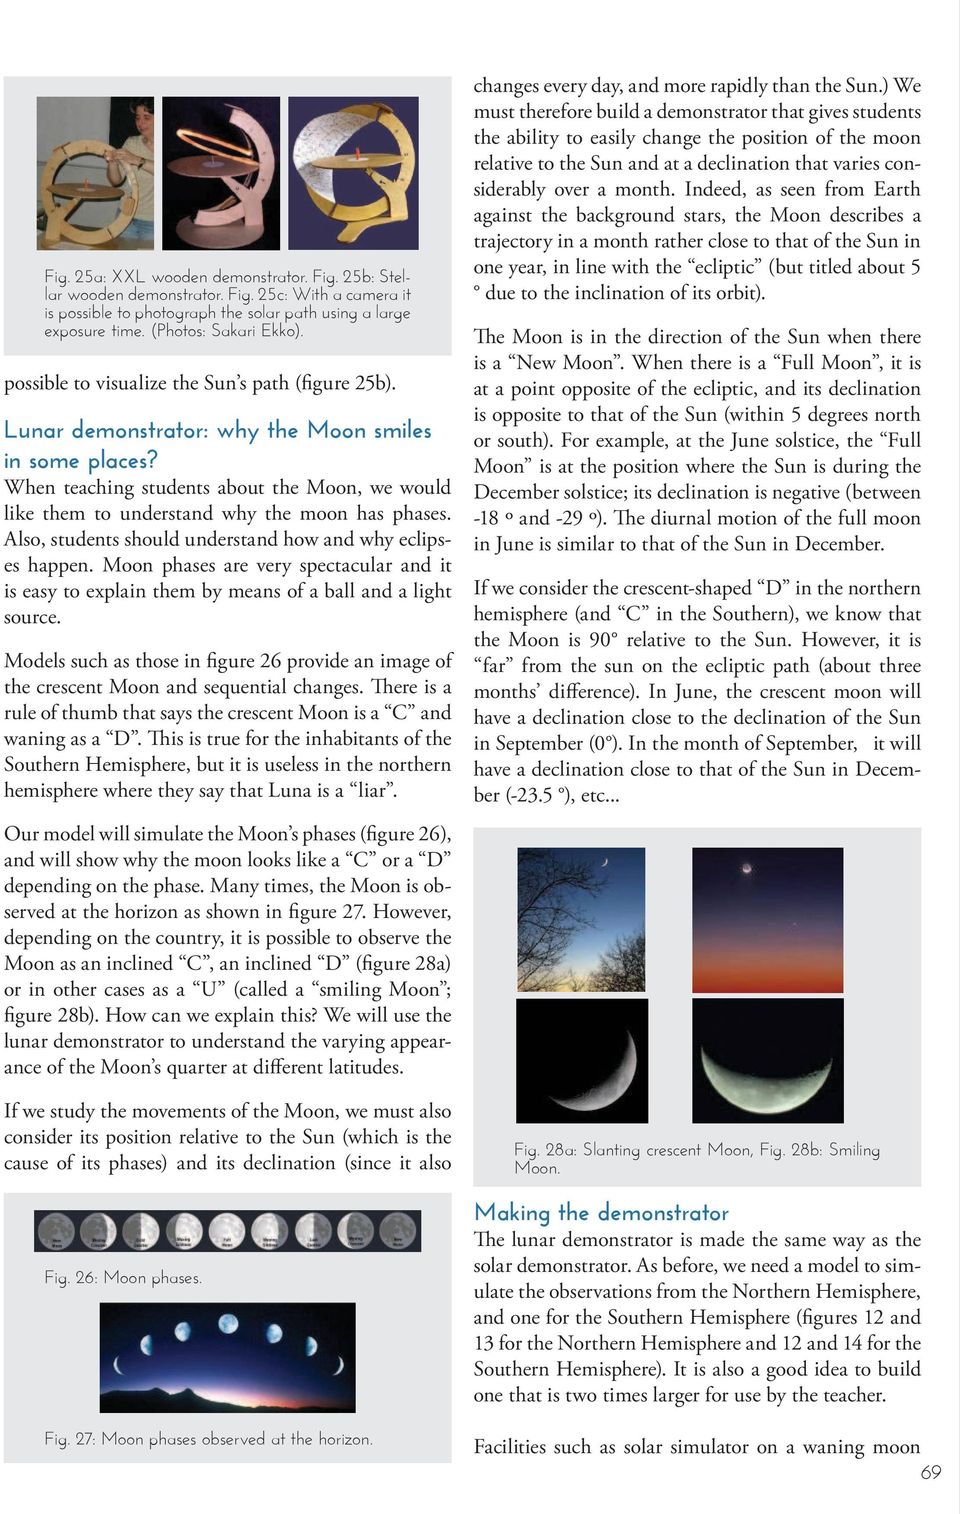 When teaching students about the Moon, we would like them to understand why the moon has phases. Also, students should understand how and why eclipses happen.